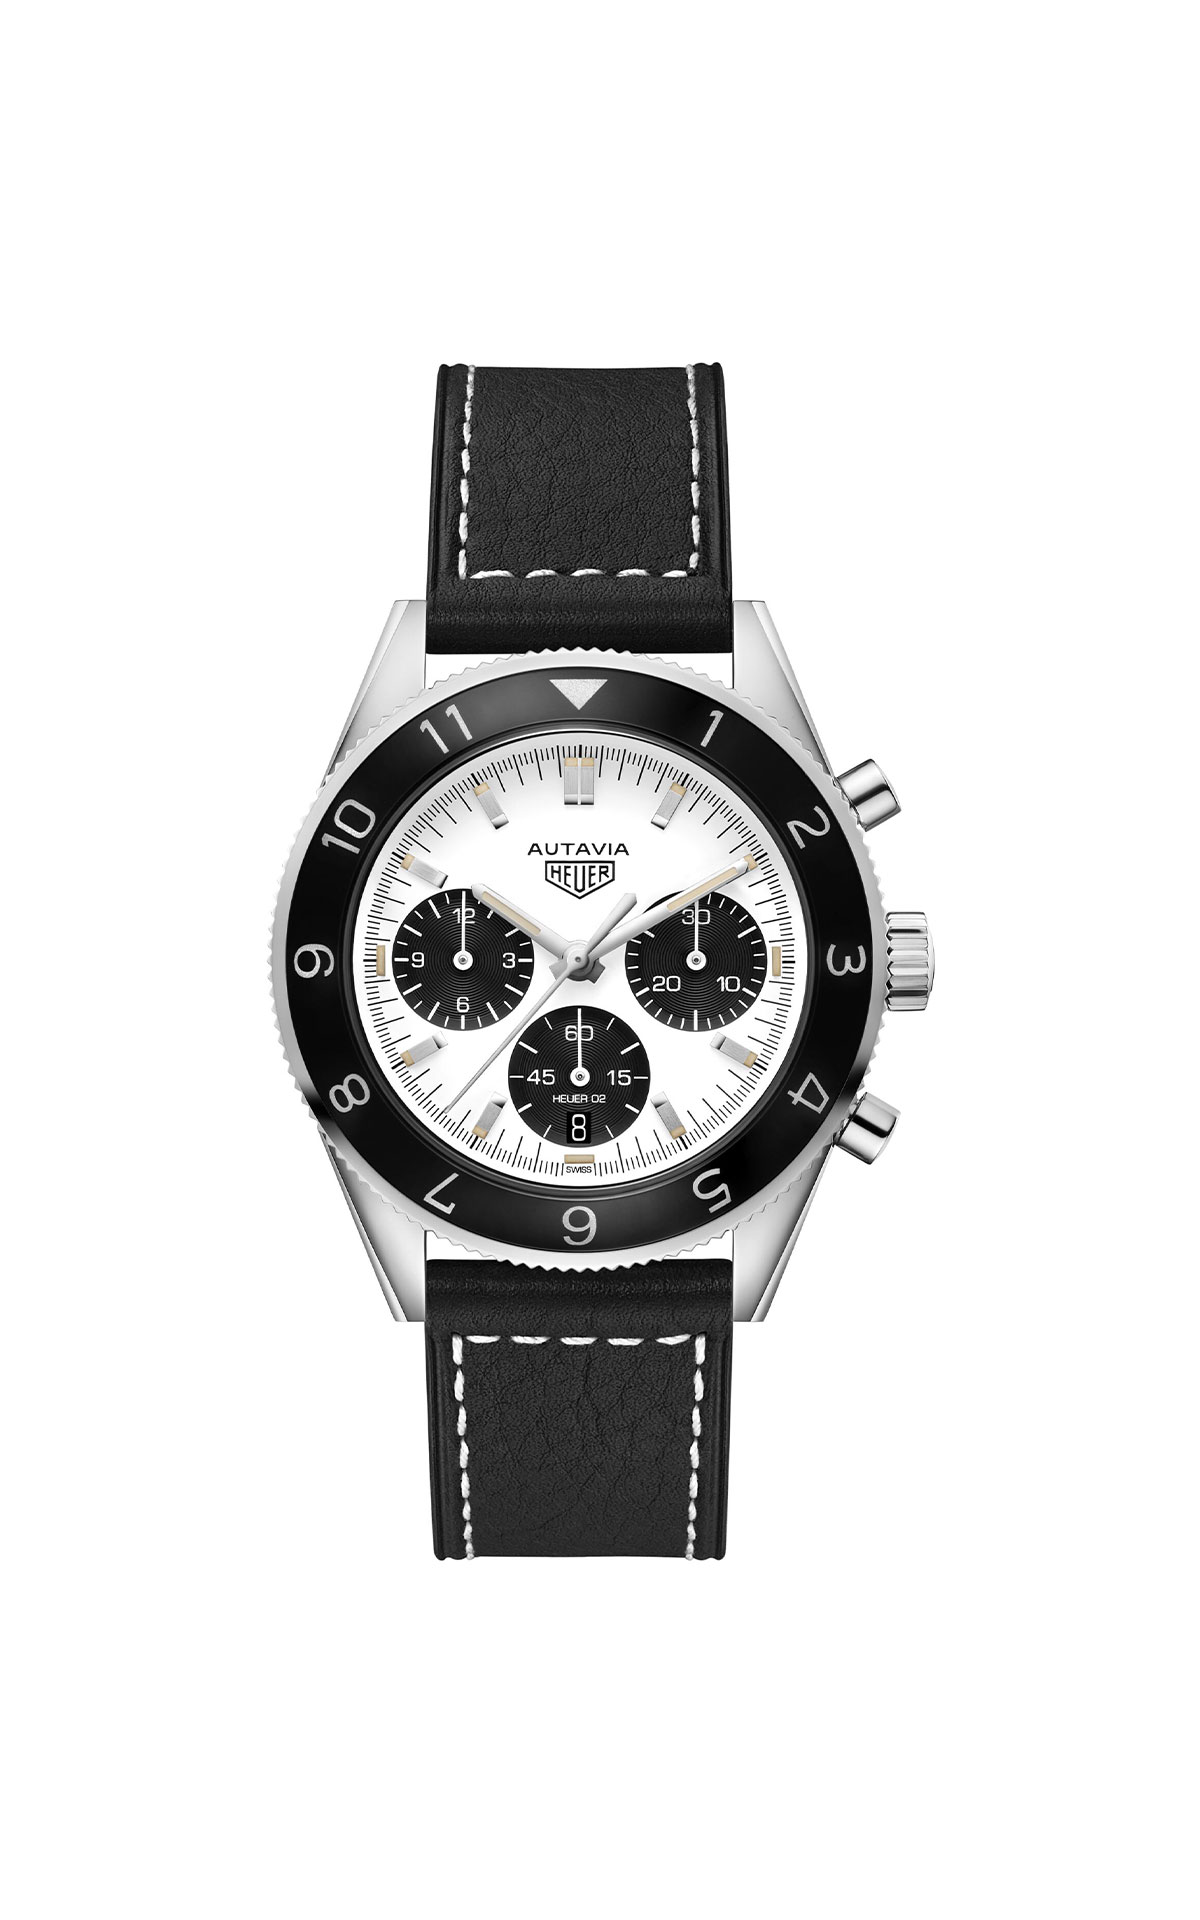 TAG Heuer Heuer autavia calibre heuer 02 leather strap from Bicester Village